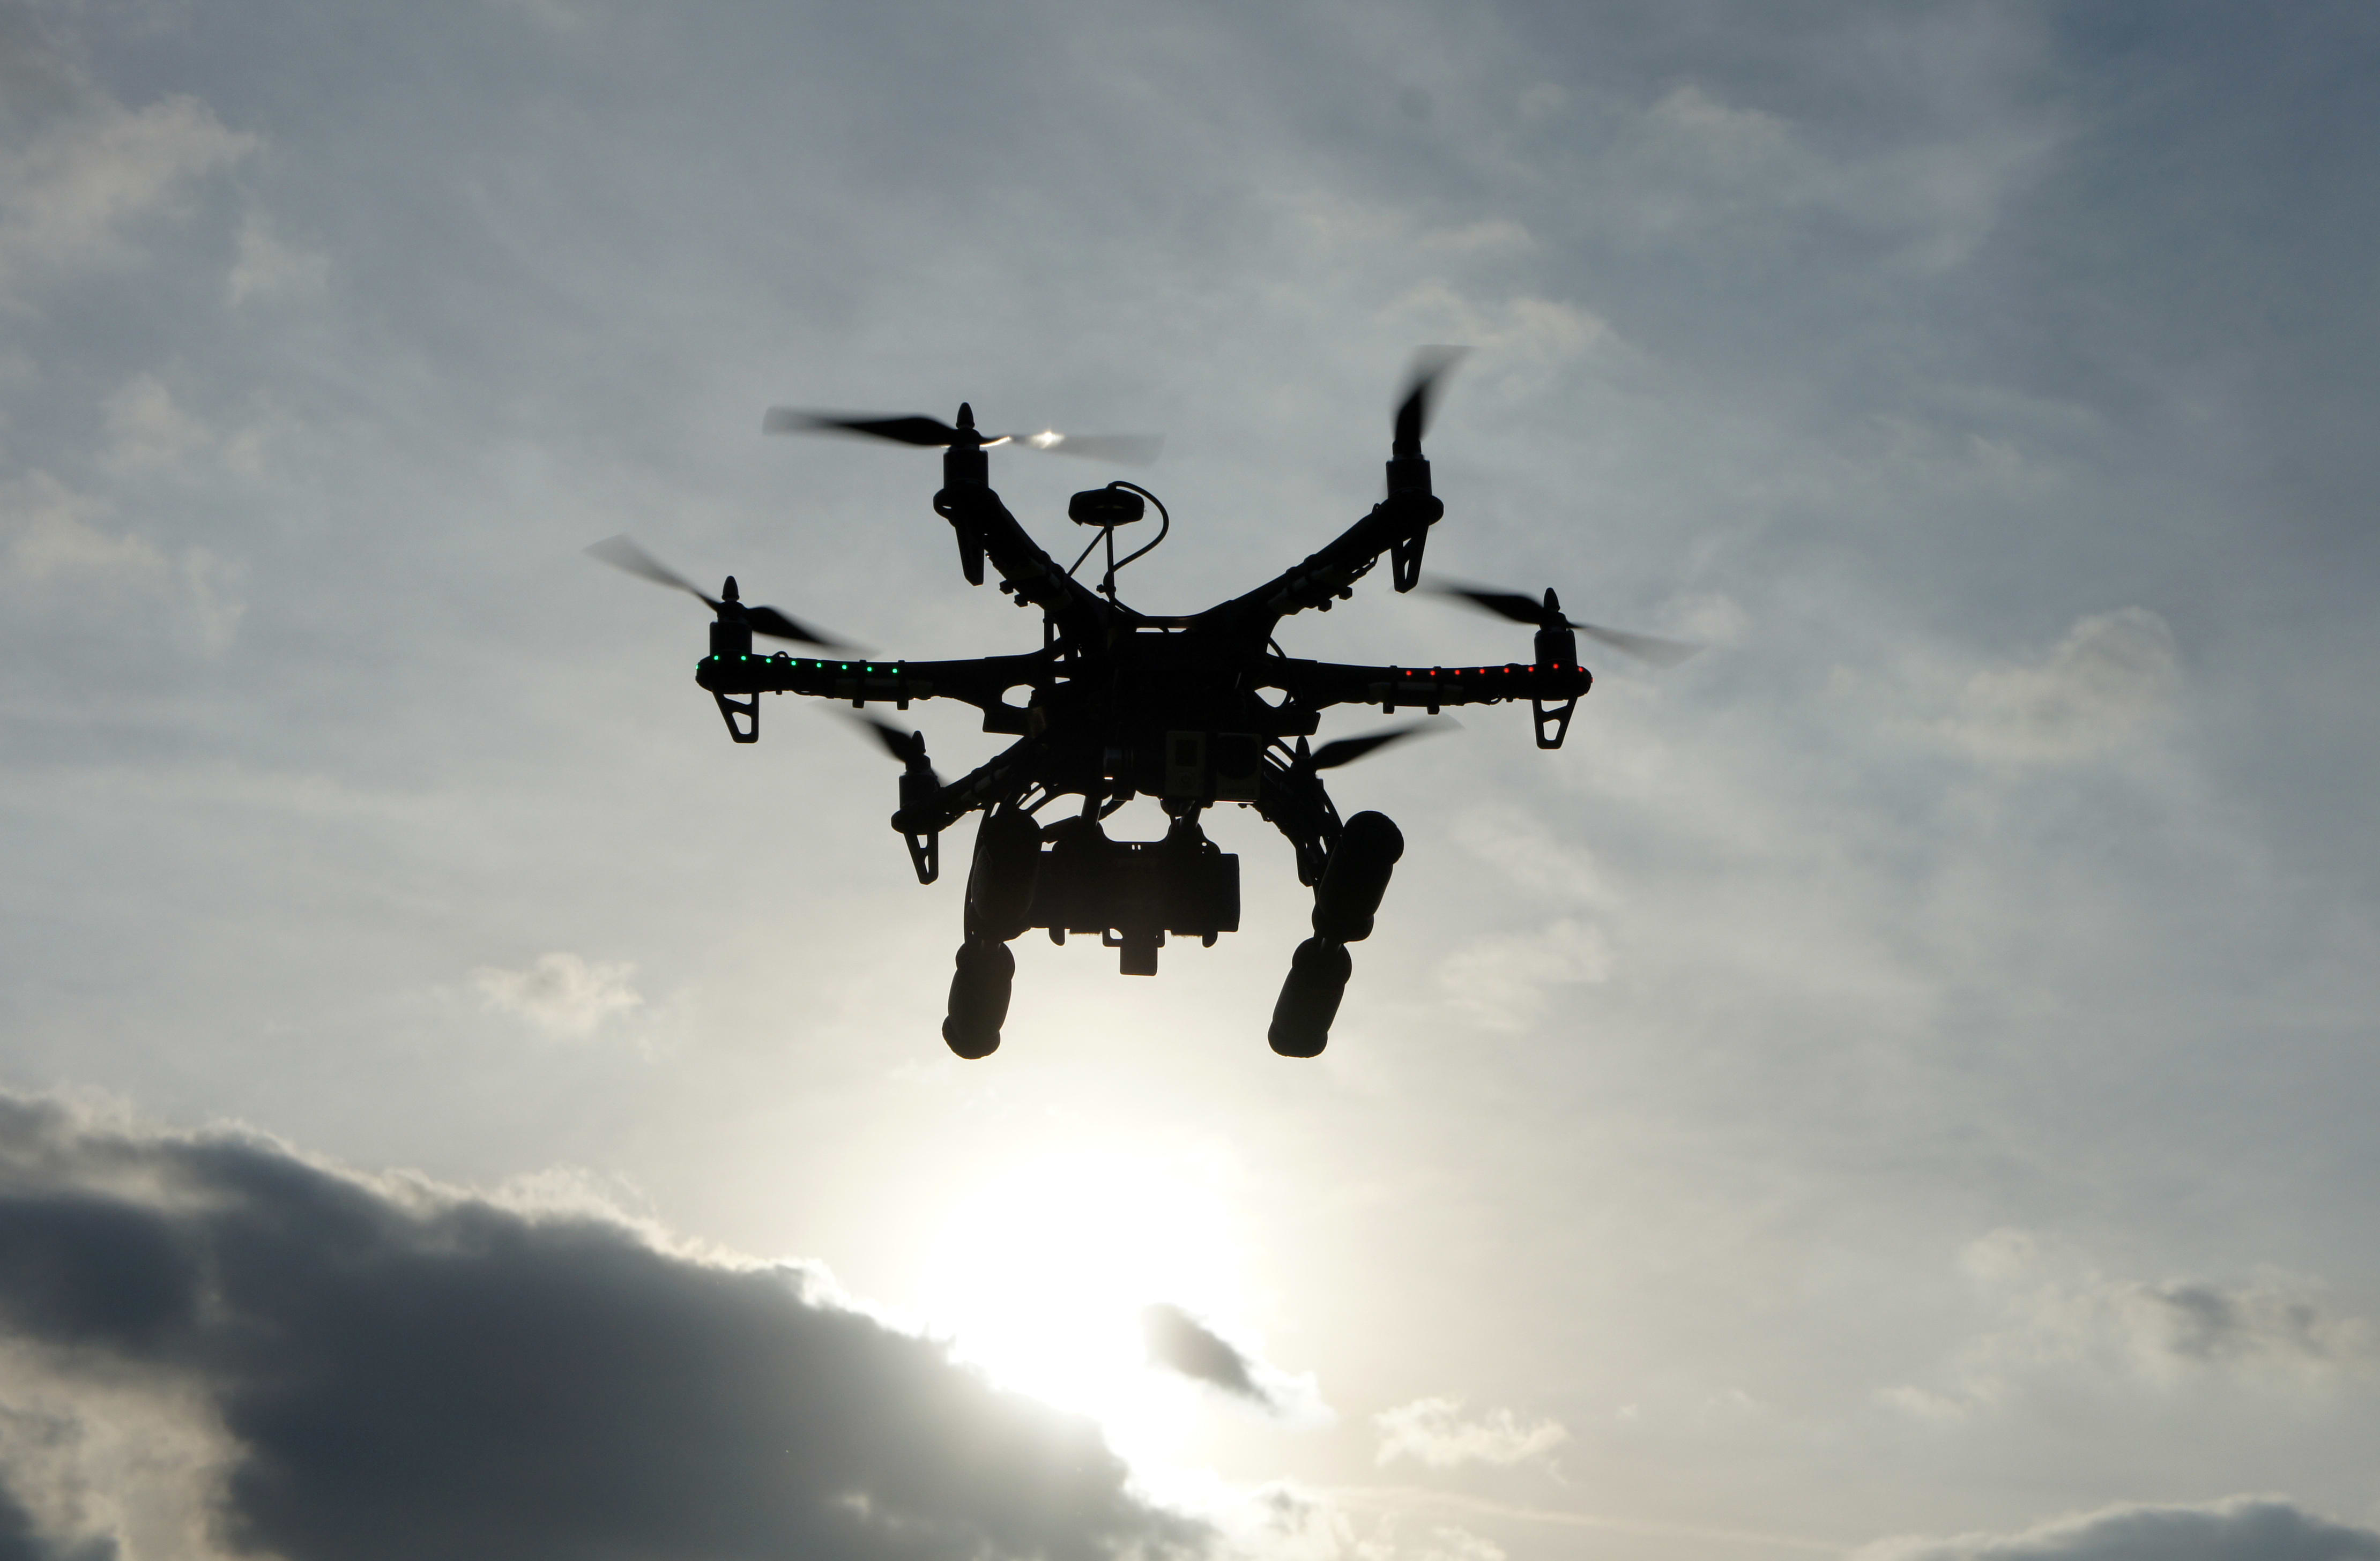 Goldman Sachs bankers are using flying drones to help clinch billion-dollar M&A deals